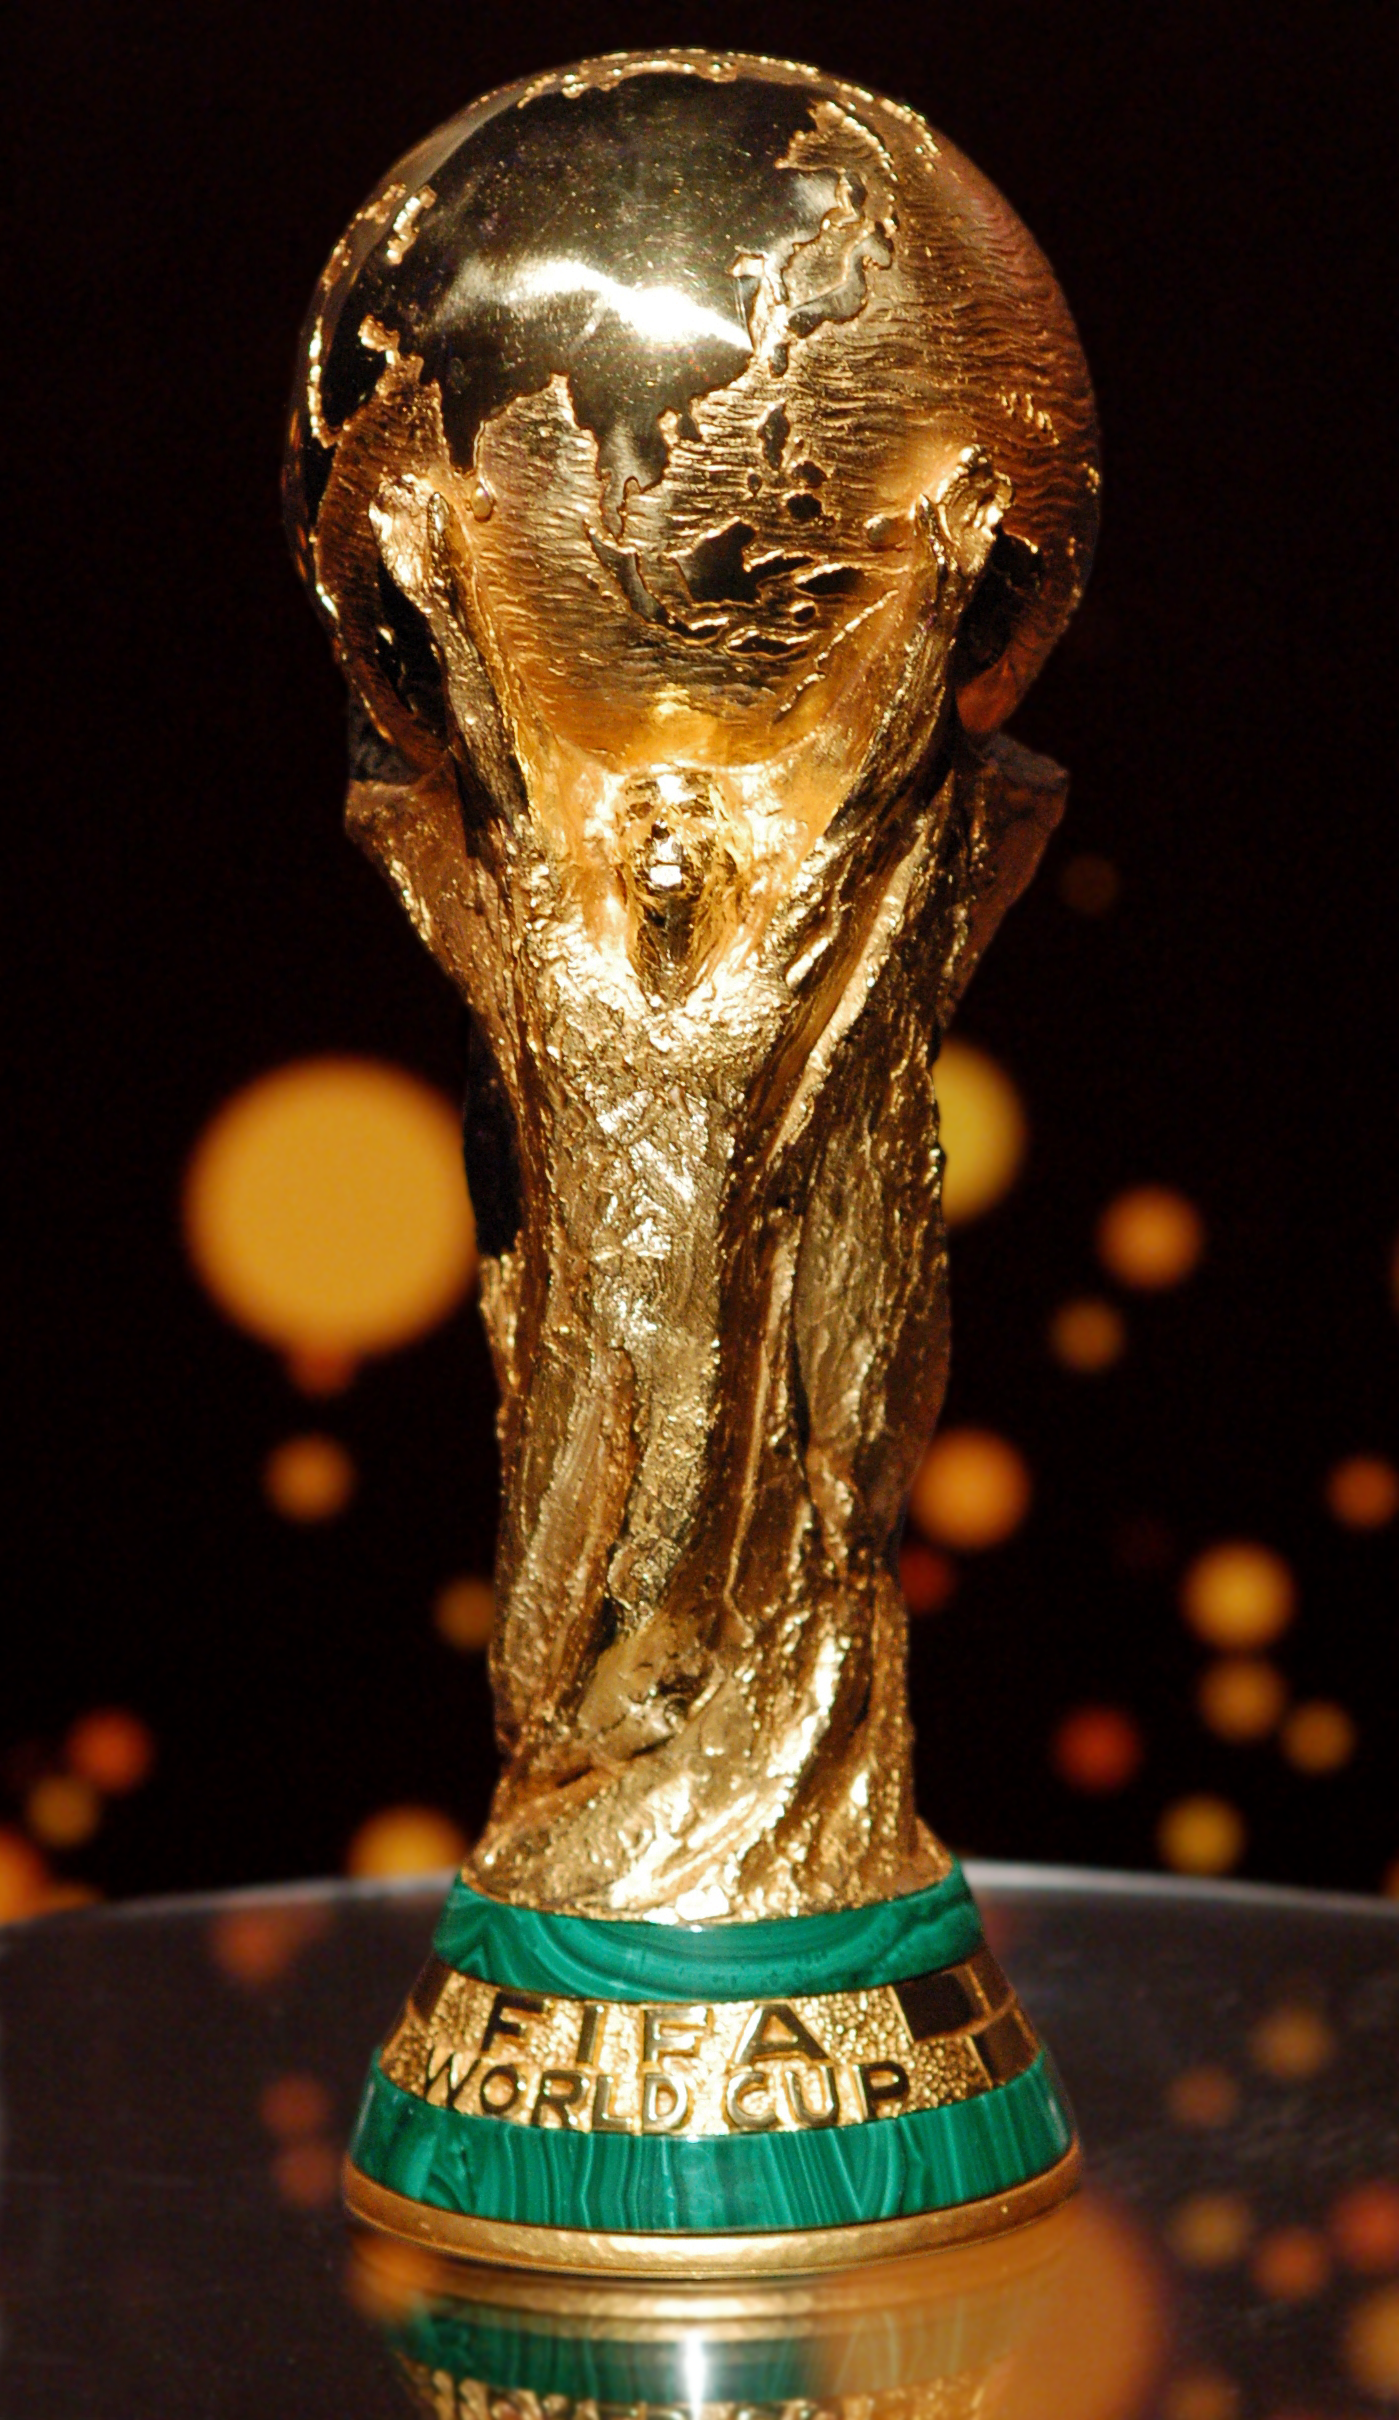 Going to a World Cup Final! #fifa #worldcup #football #soccer. World cup trophy, World cup, World cup match